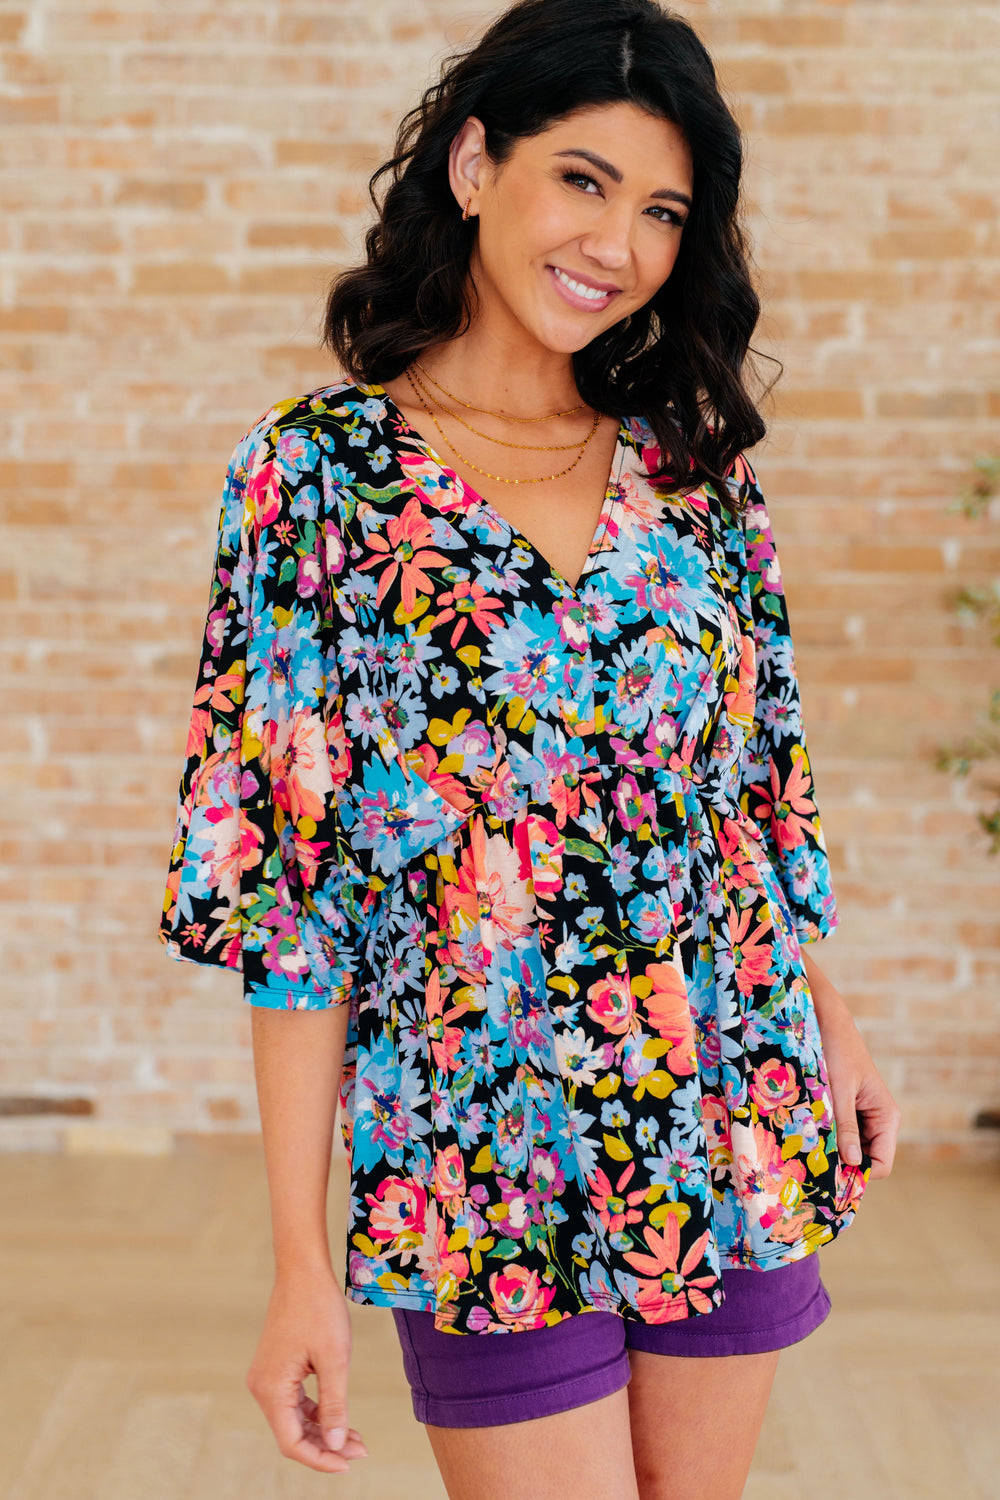 Dreamer Peplum Top in Black Multi Floral-Long Sleeve Tops-Inspired by Justeen-Women's Clothing Boutique in Chicago, Illinois